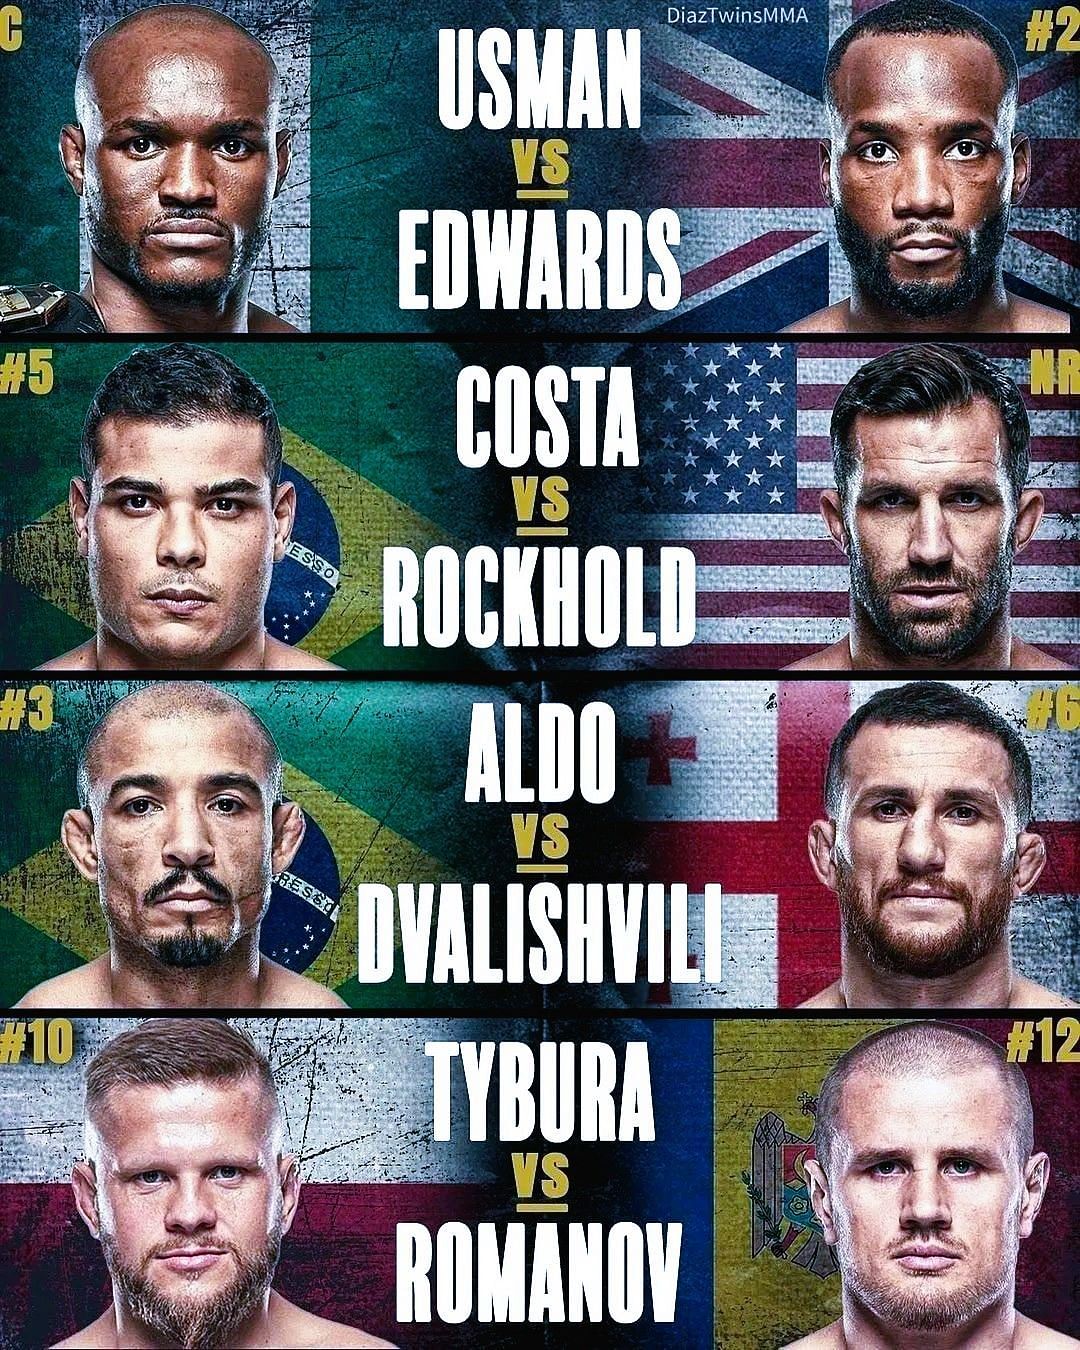 The main card of the pay-per-view is stacked [Image via @thebestmmahighlights2 on Instagram]